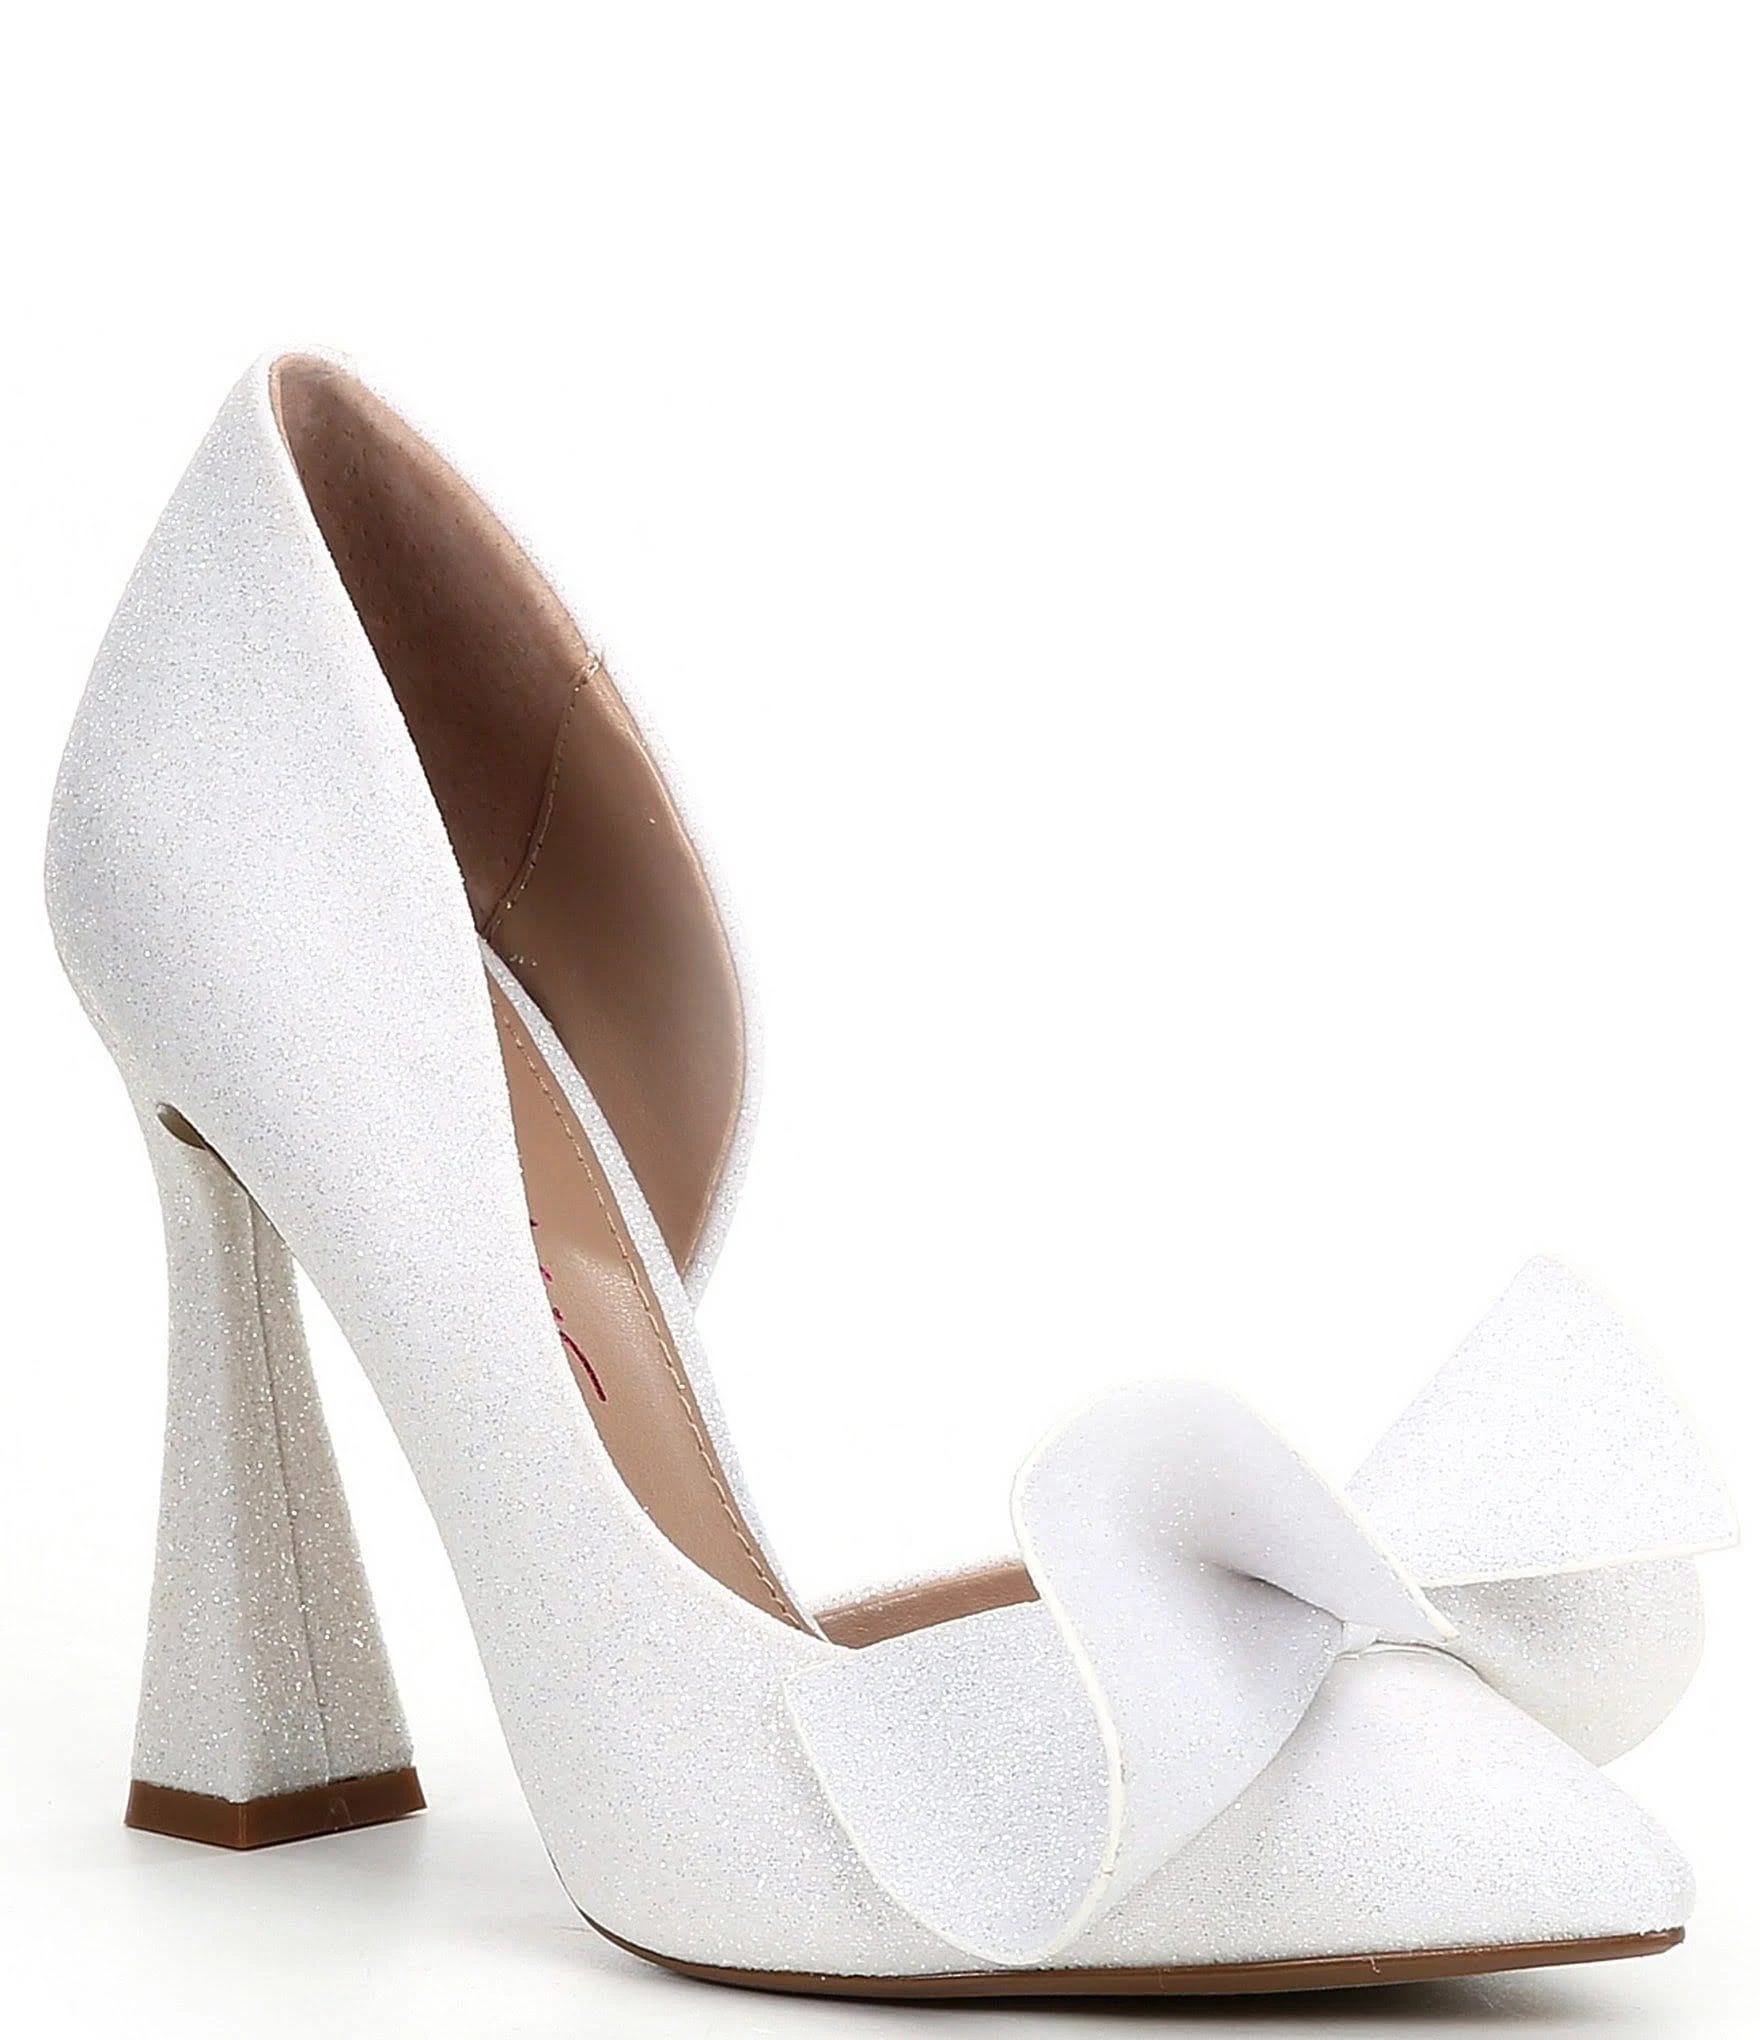 Betsey Johnson Embellished Bow Heels - All-Over Glitter Pointed Toe Pumps | Image